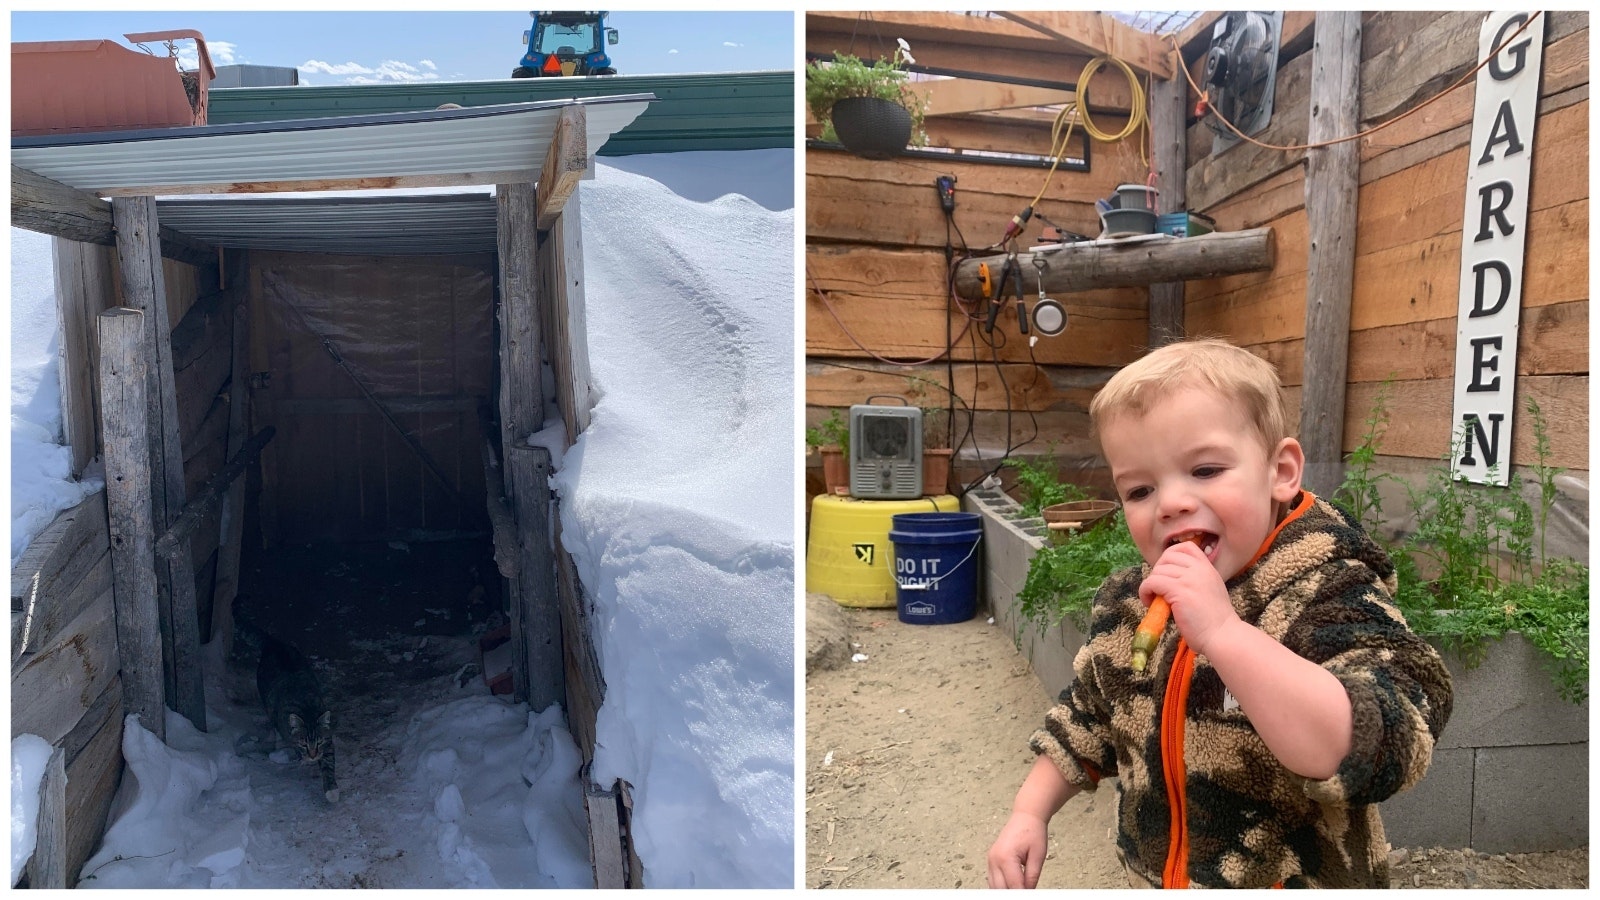 The entrance for Sara Ross' walipini at her home in Daniel, Wyoming. Her grandson Huxton loves running in there to snag some carrots to snack on.